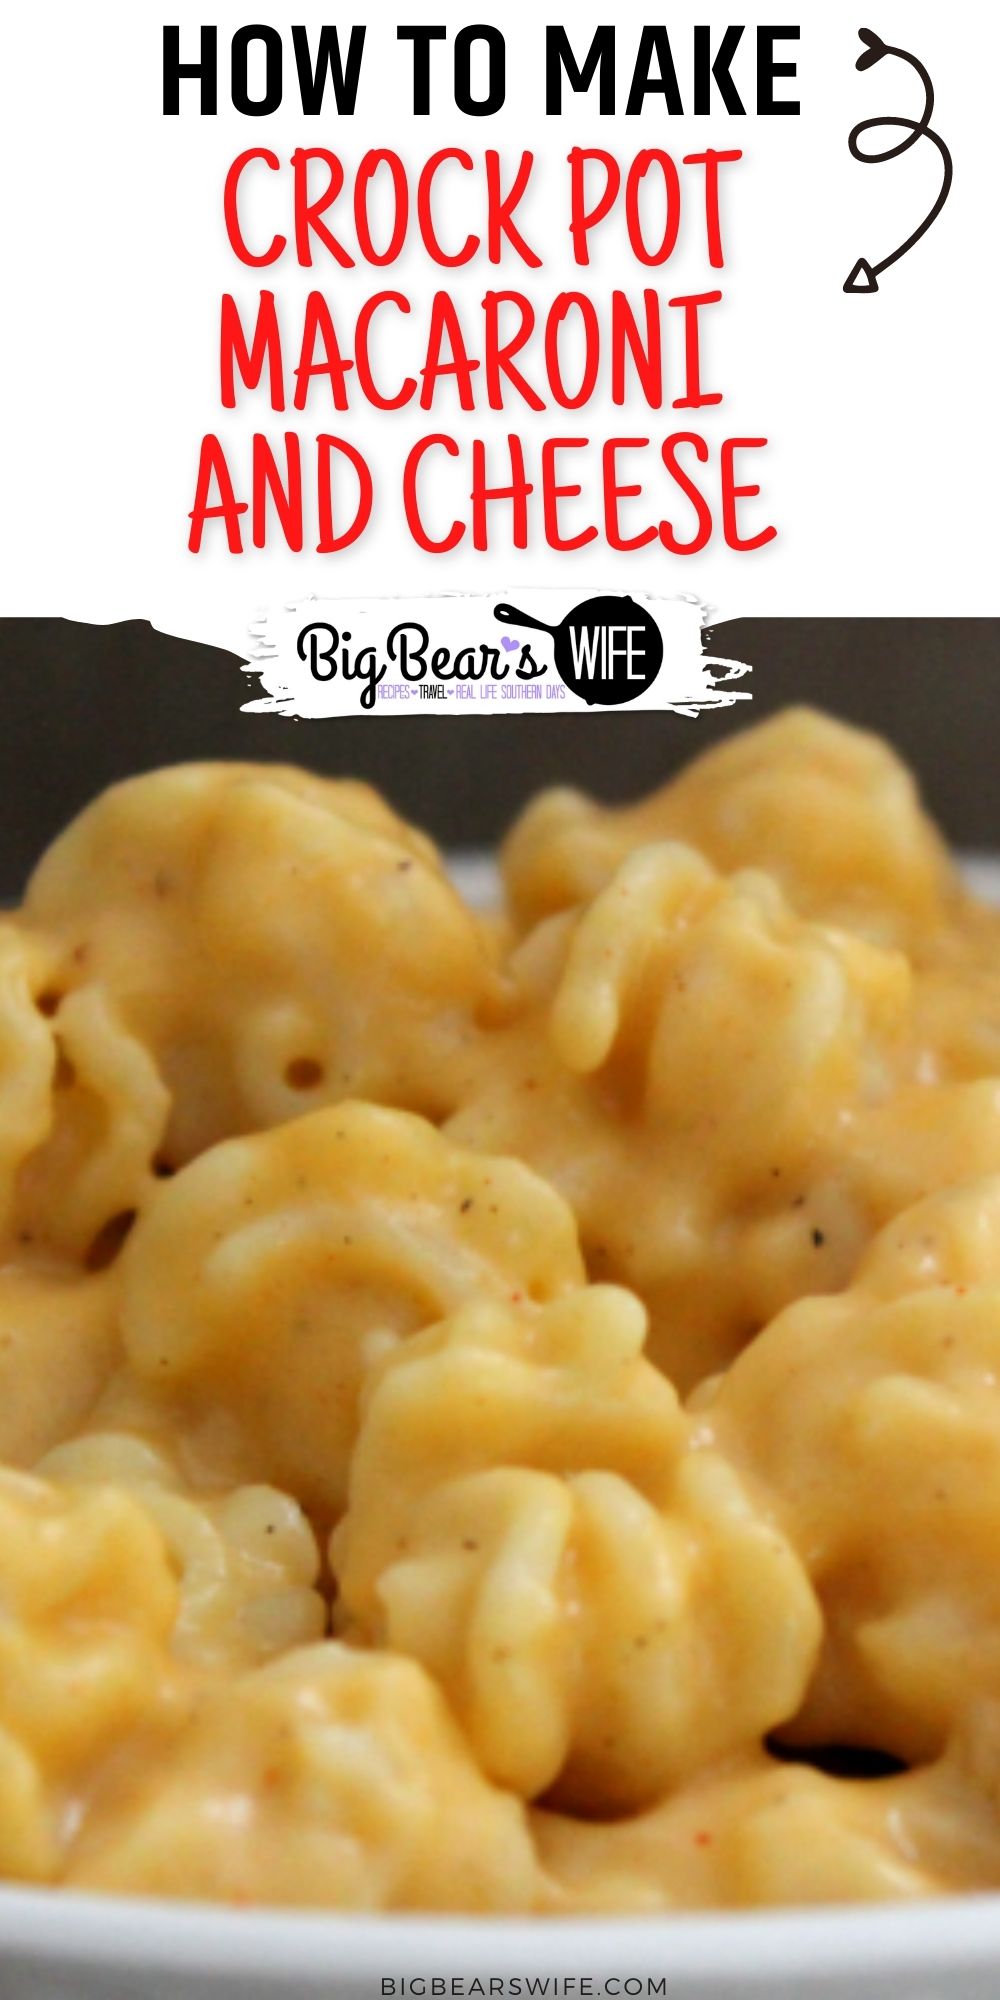 Did you know that you can make Macaroni and Cheese in the slow cooker? You CAN! It's so easy with my favorite Crock Pot Macaroni and Cheese recipe!  via @bigbearswife